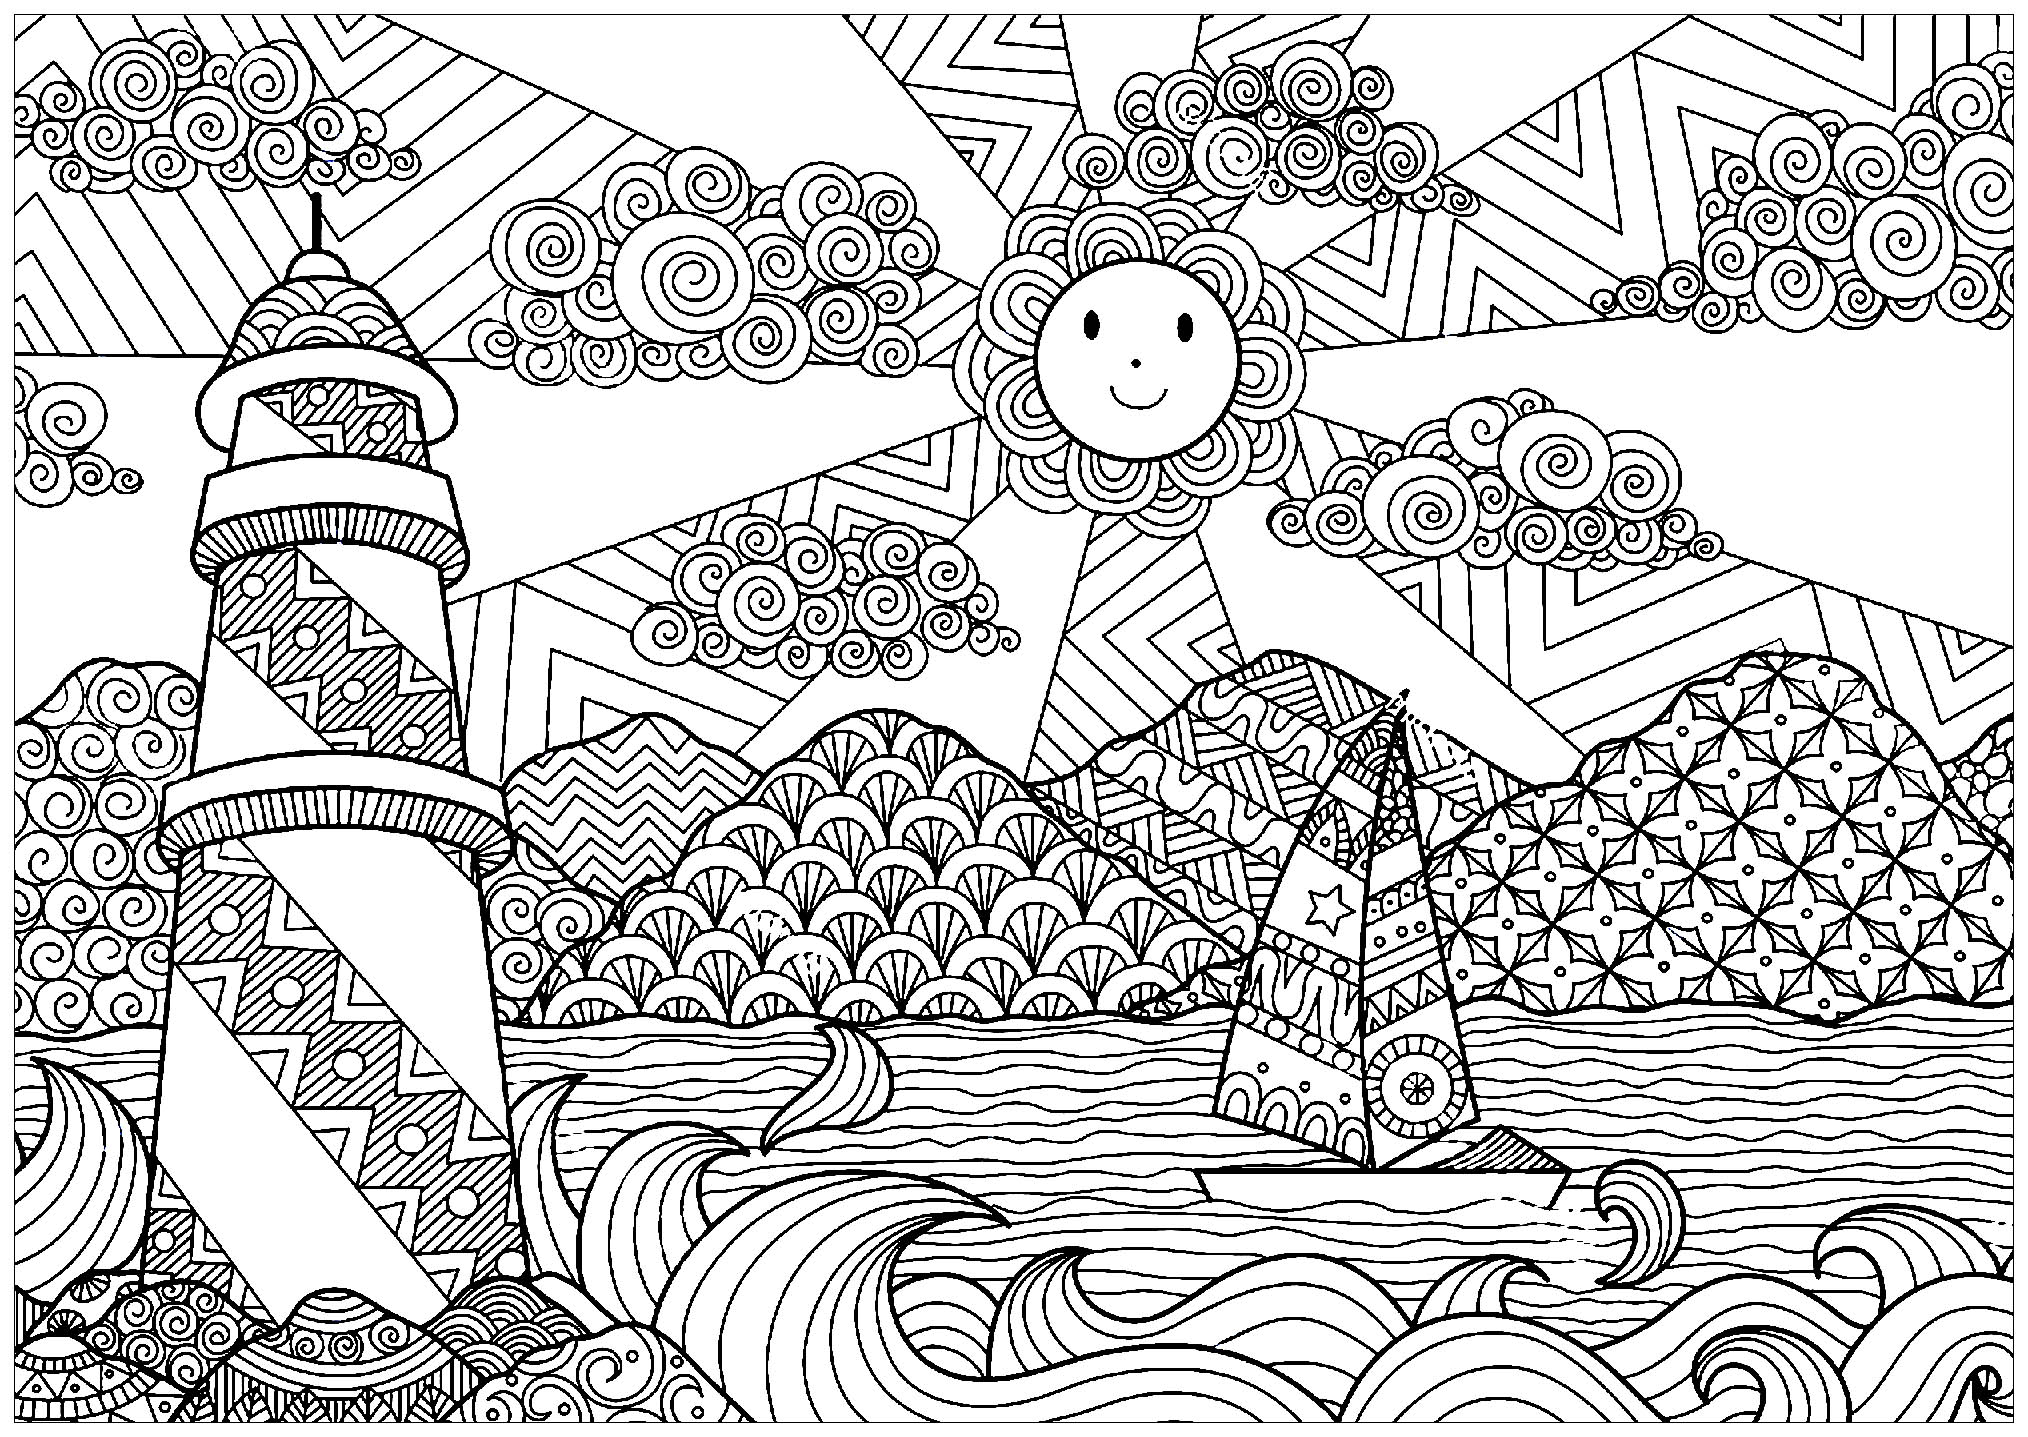 Scenery Coloring Pages For Kids Here presented 62+ scenery drawing